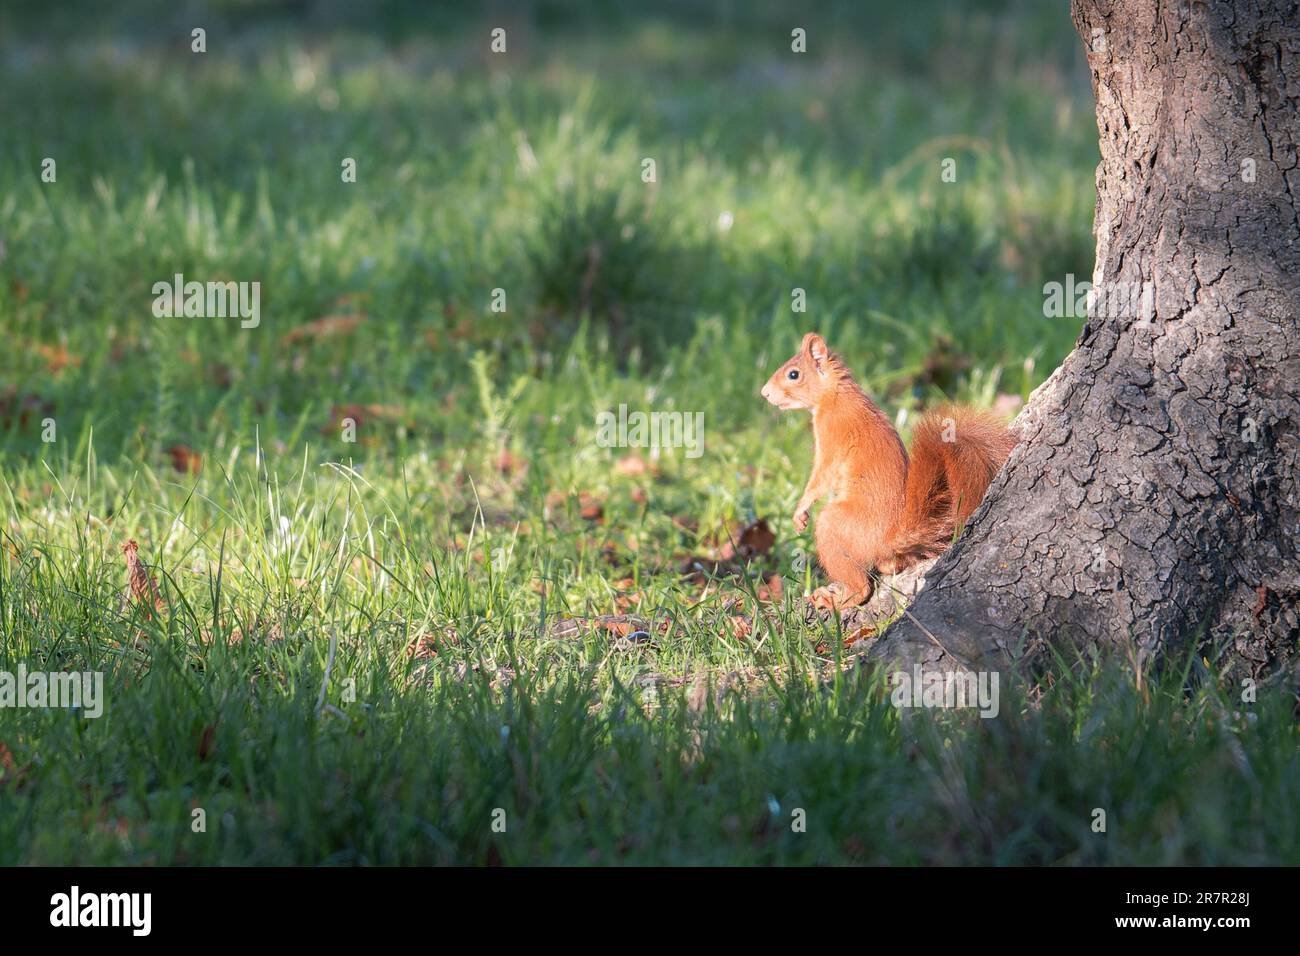 Red squirrel on the grass near a tree Stock Photo